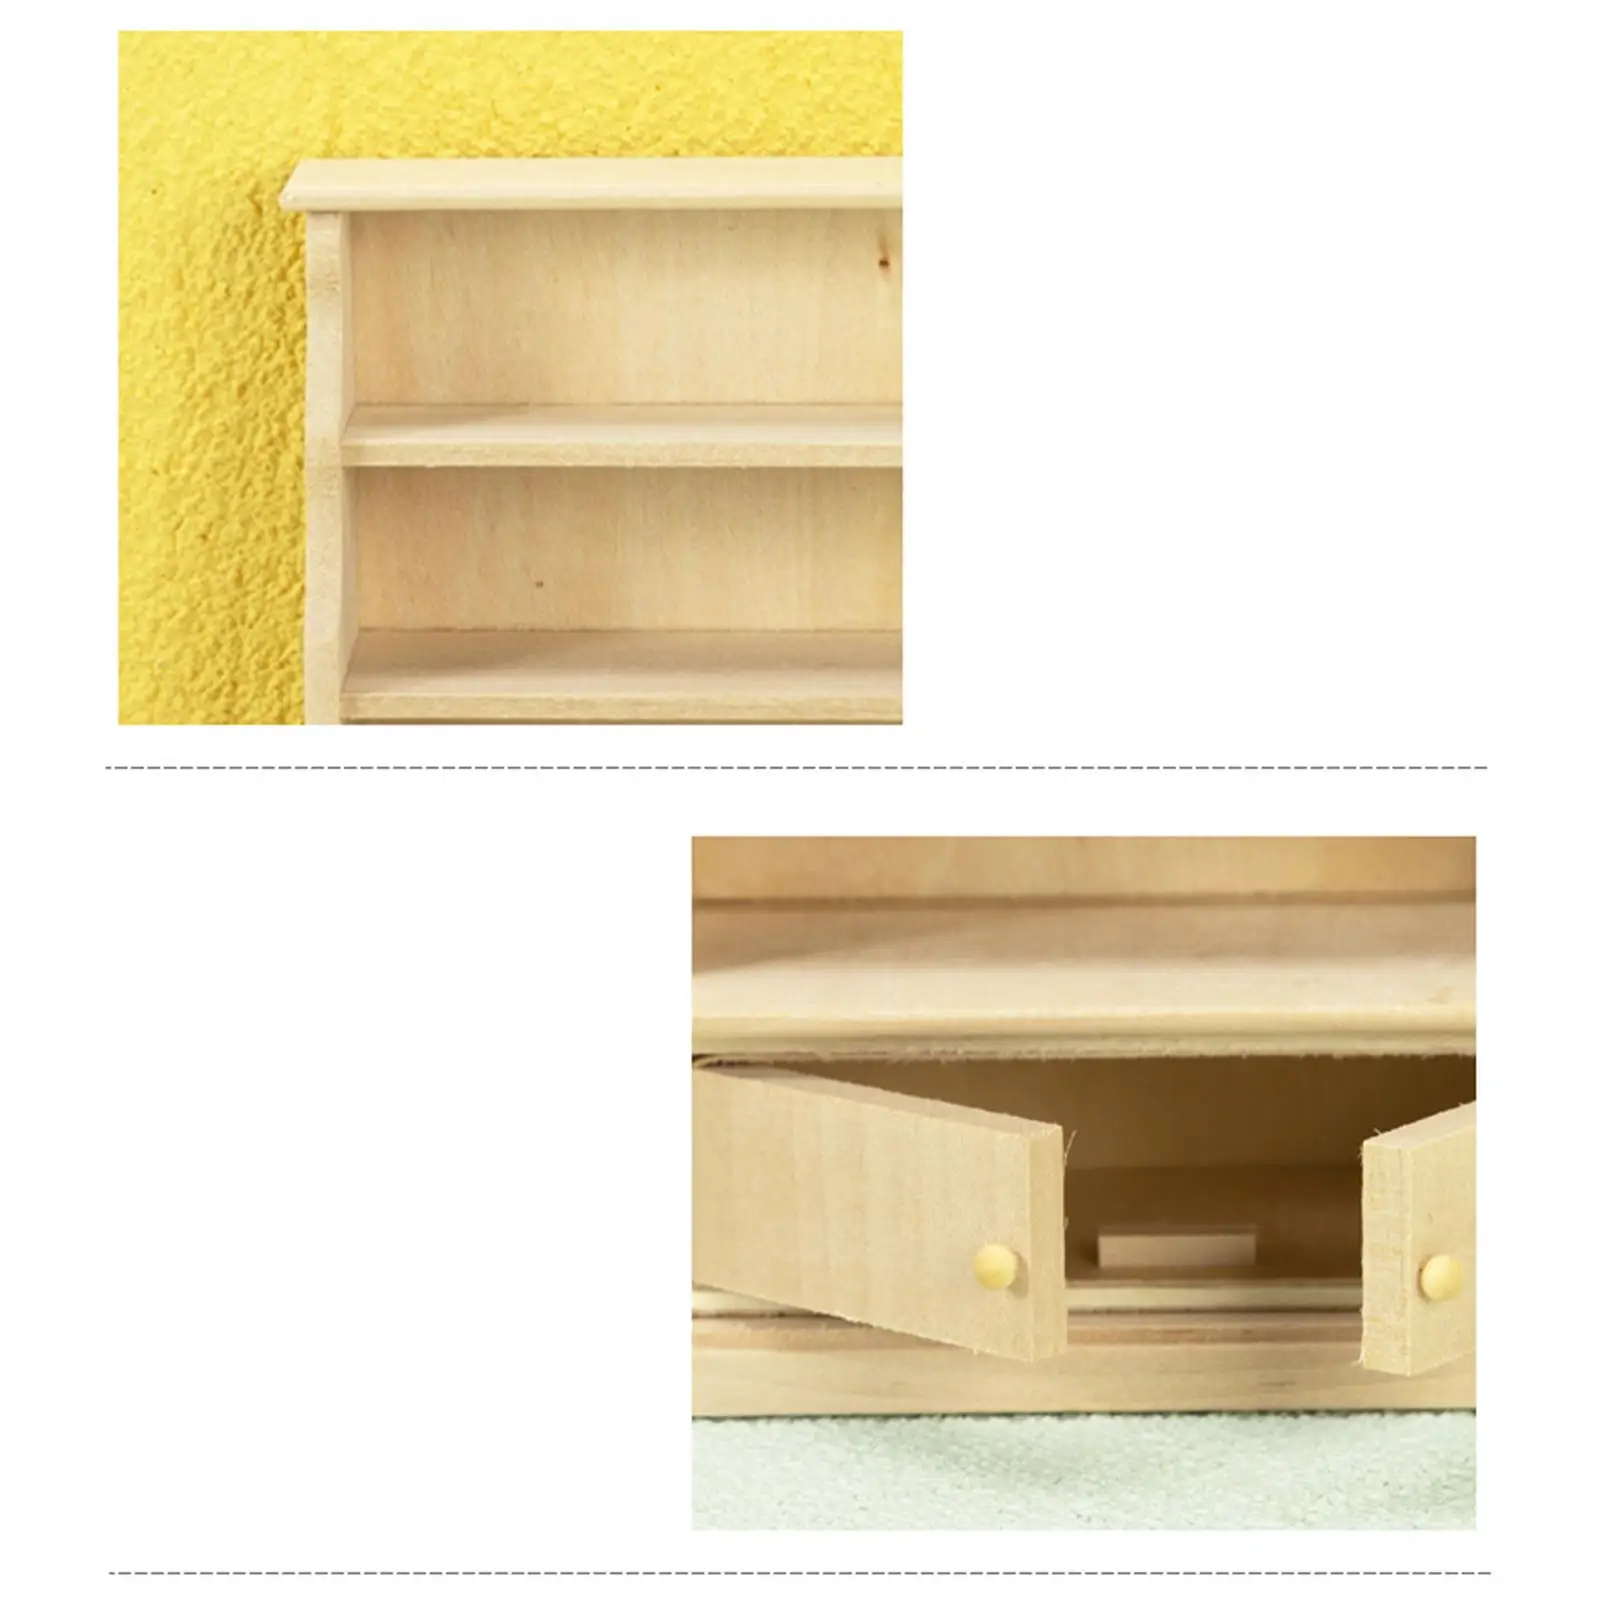 Miniature Dollhouse Furniture, Mini Wooden Cabinet Drawers Simulated Furniture Model for 1:12 Doll House Accessories Furniture